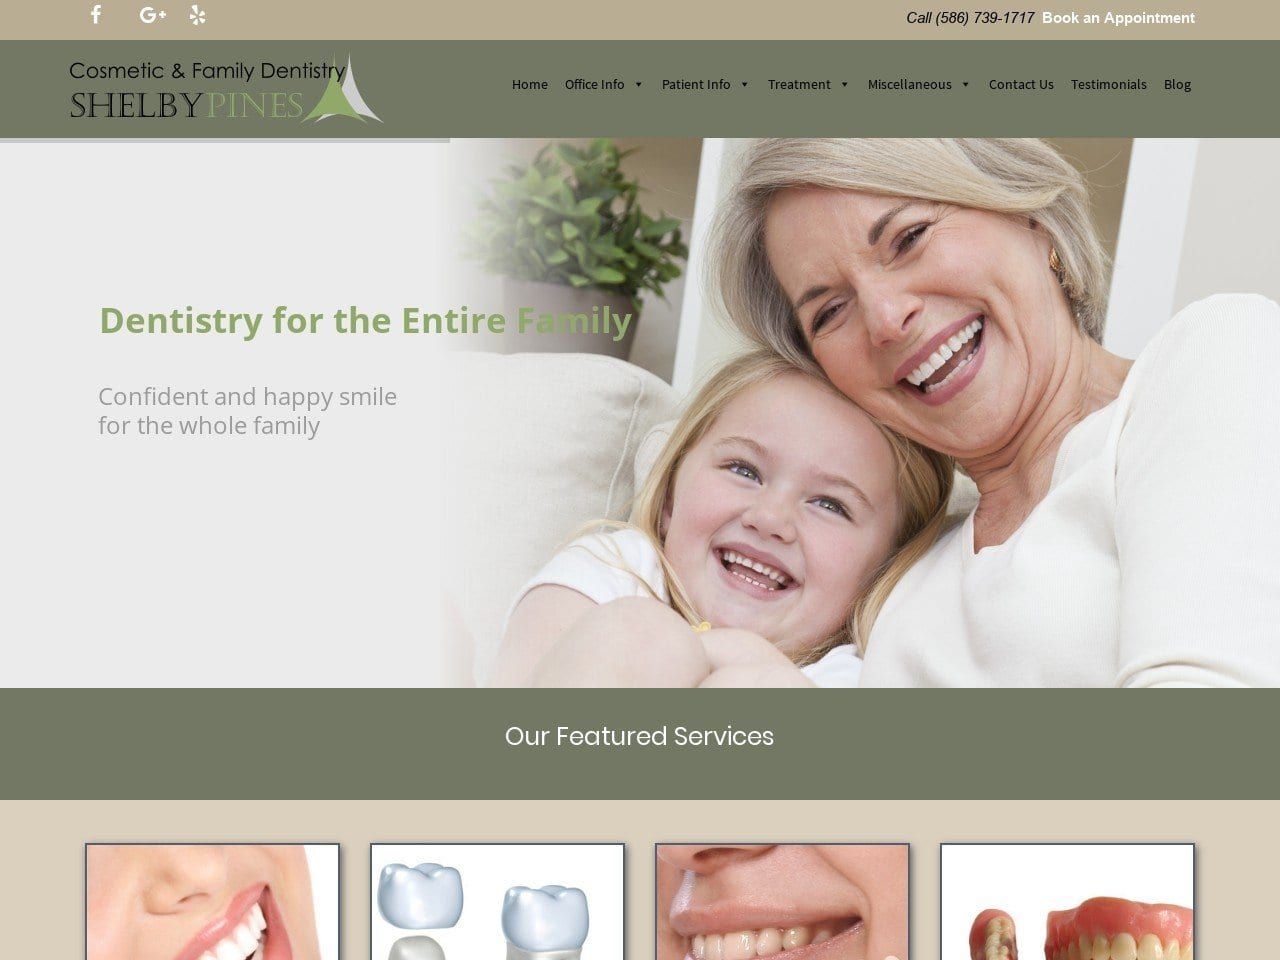 Shelby Pines Family Dentist Website Screenshot from shelbypines.com